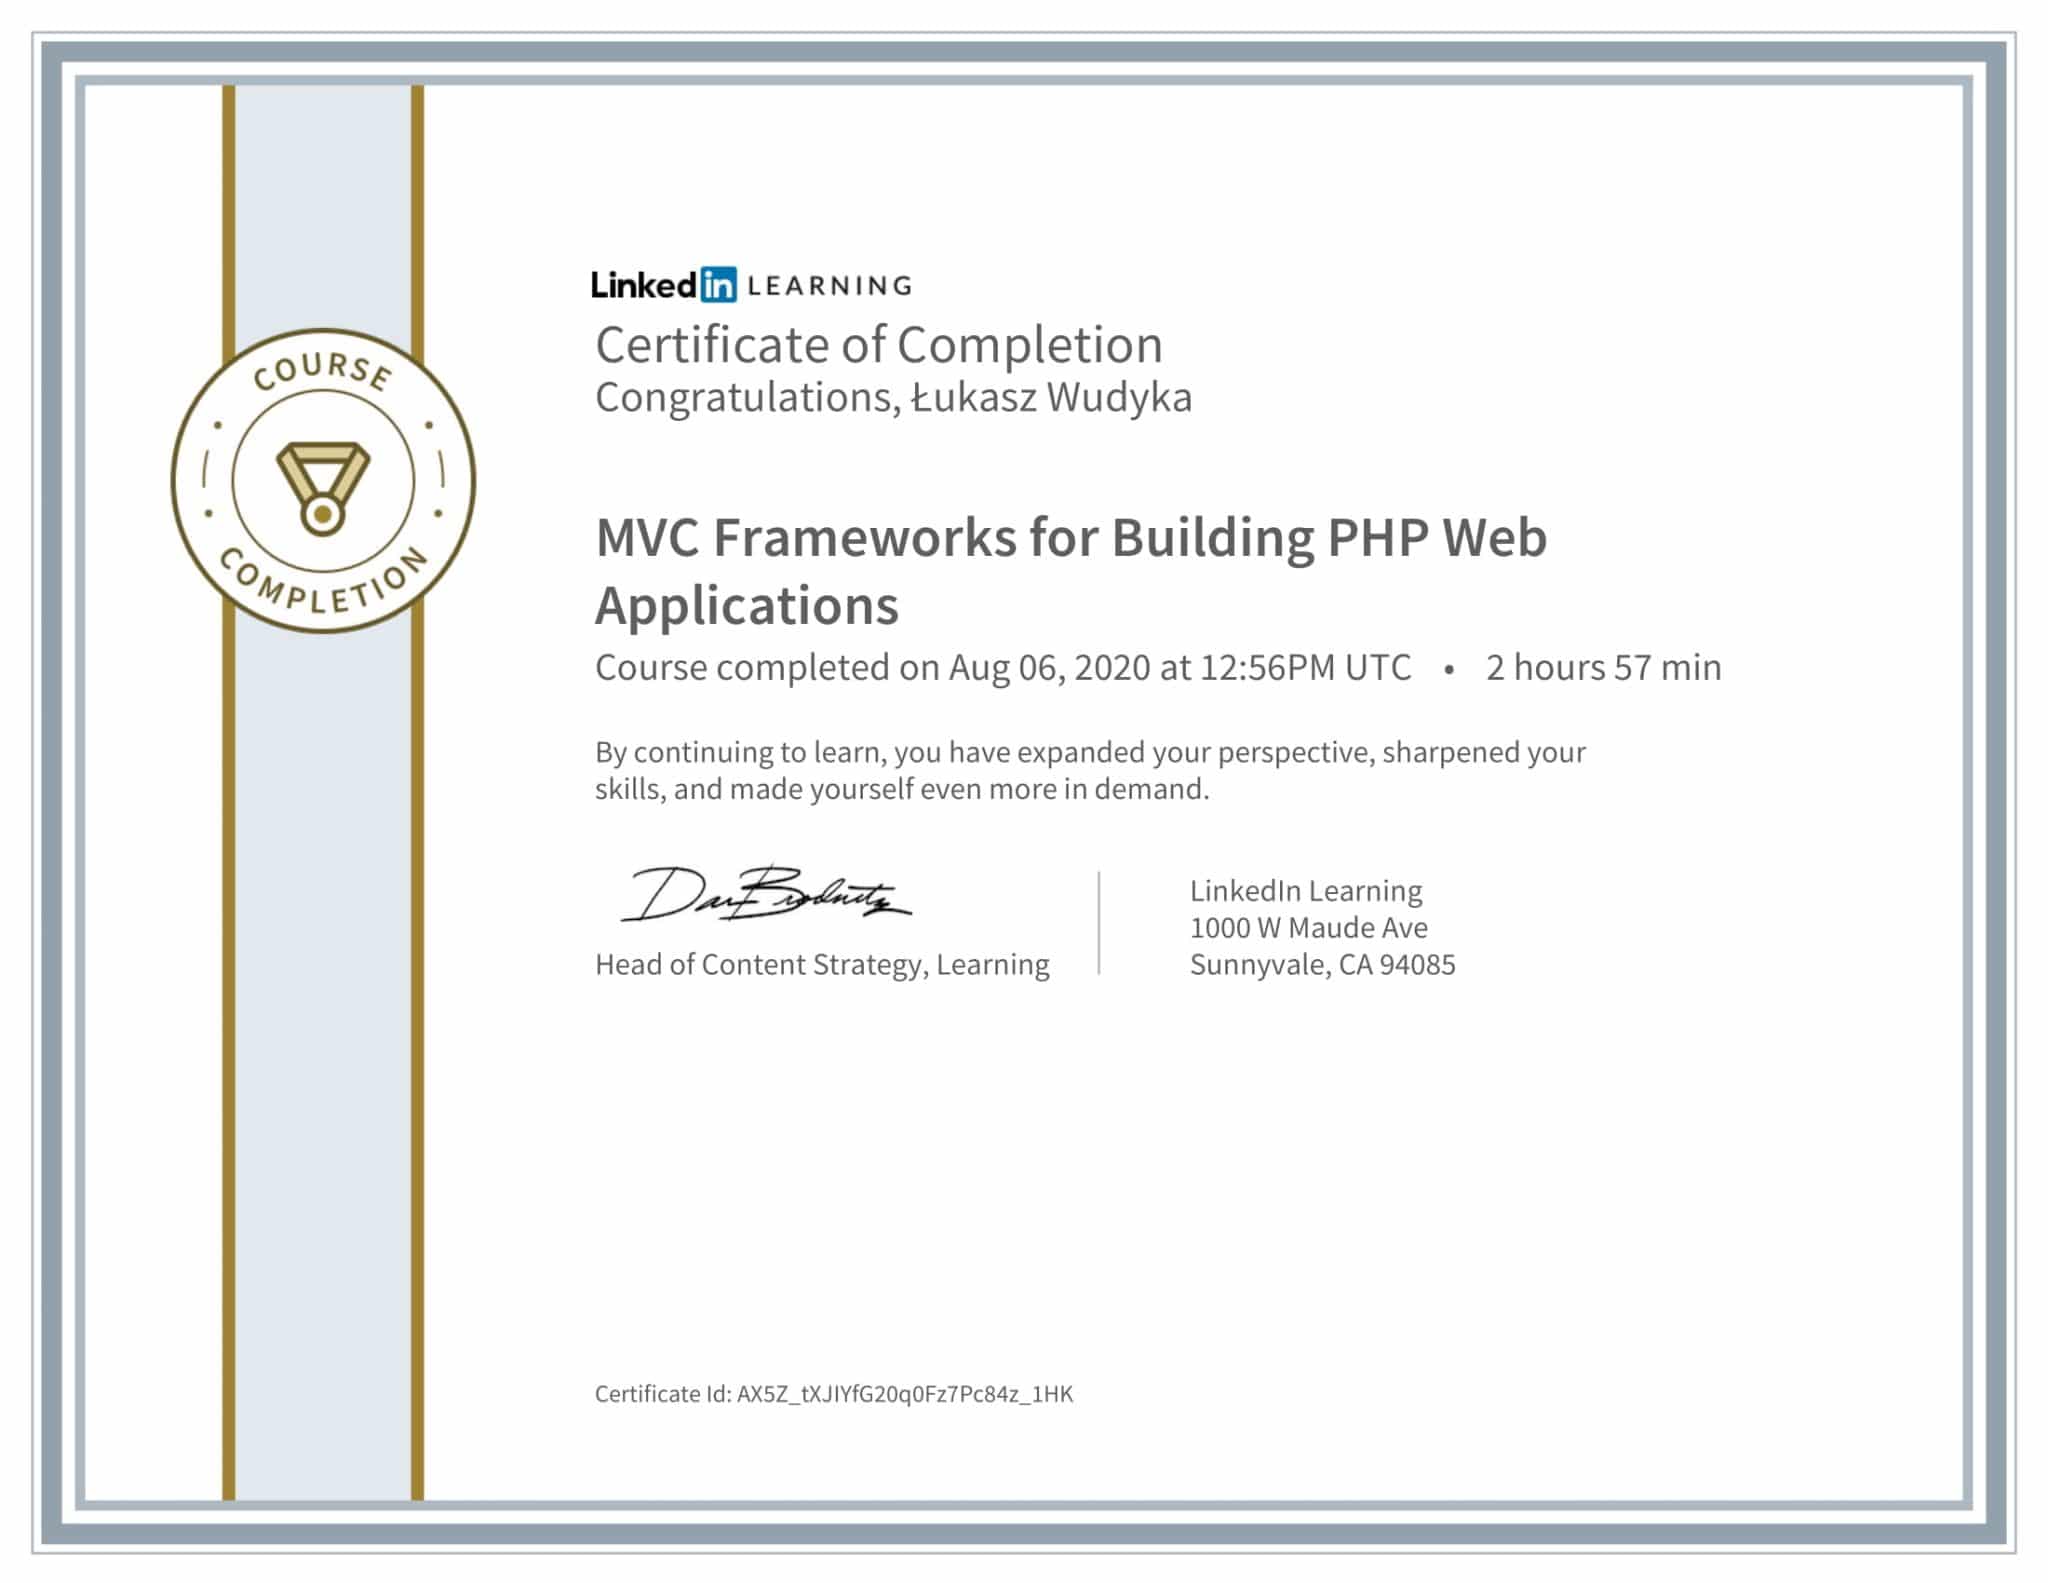 CertificateOfCompletion_MVC Frameworks for Building PHP Web Applications-1